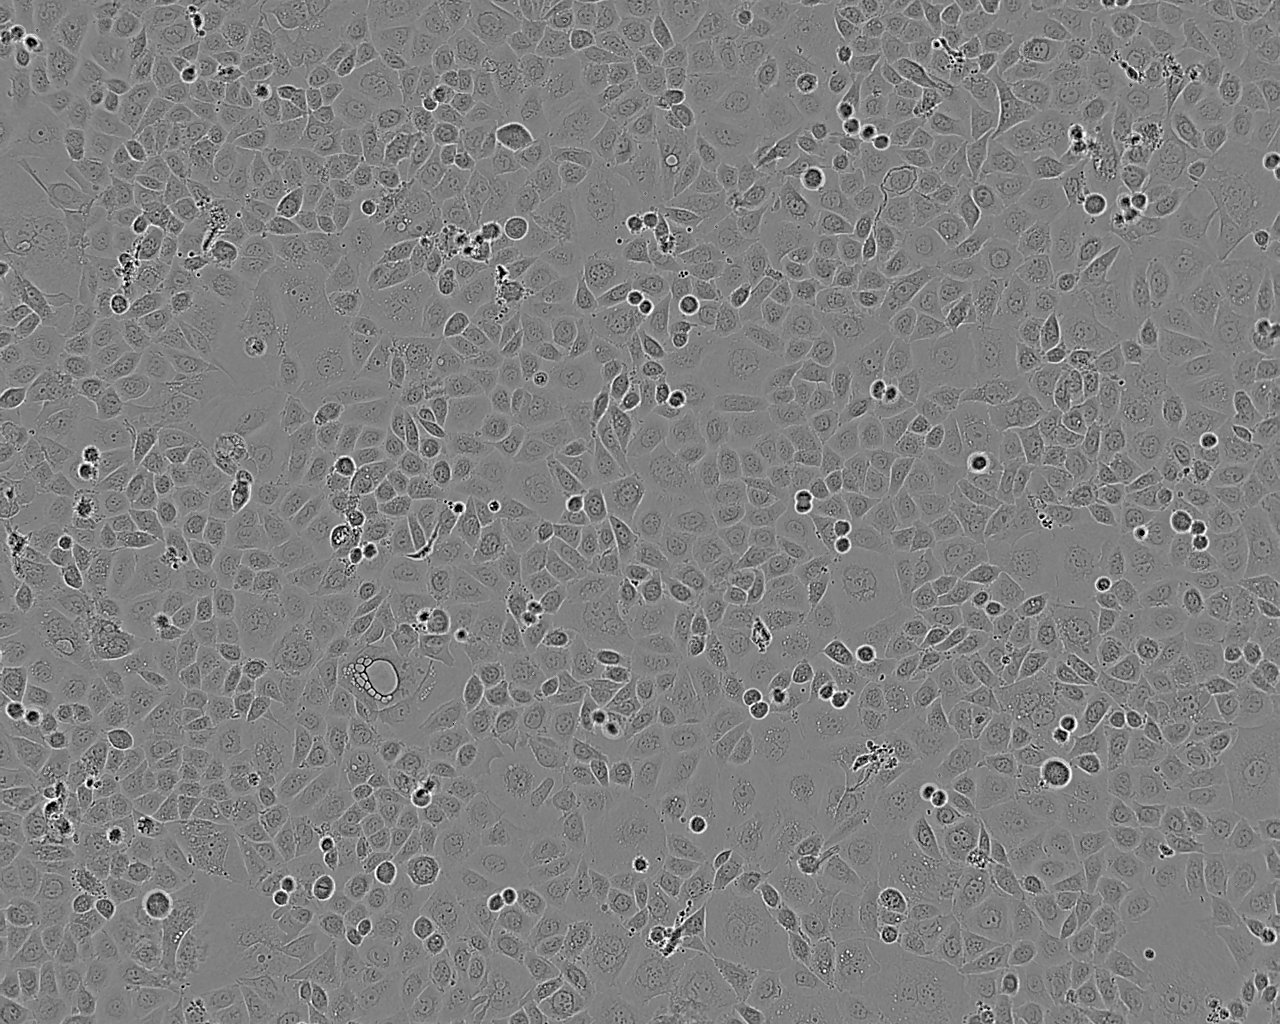 SW1463 Epithelial Cell|人结肠腺癌传代细胞(有STR鉴定),SW1463 Epithelial Cell